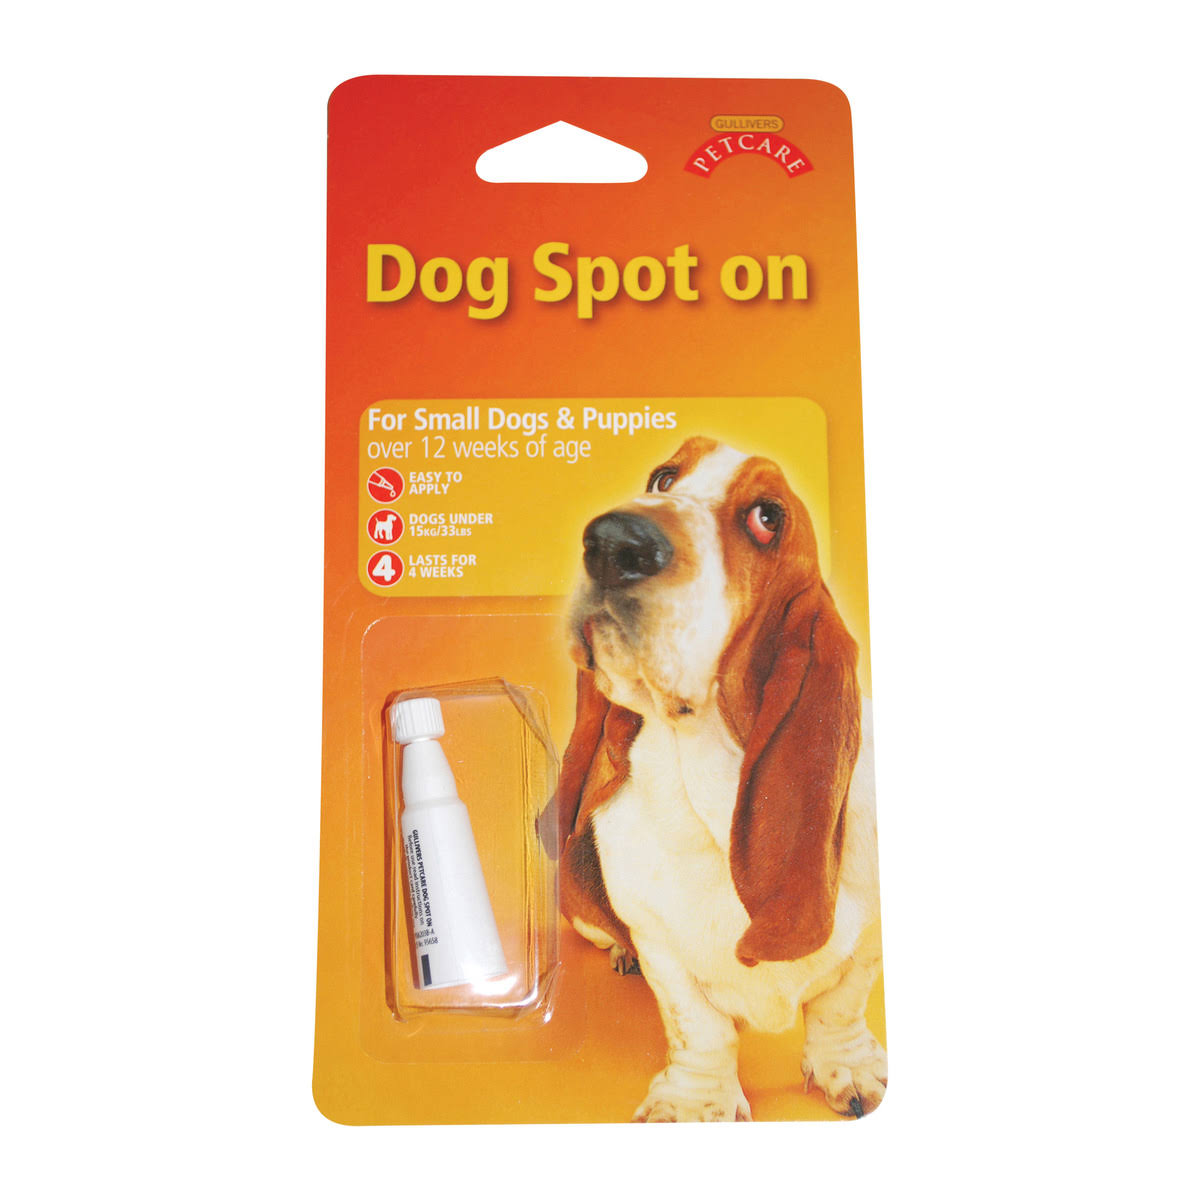 Gullivers Petcare Dog Spot On - for Small Dogs and Puppies